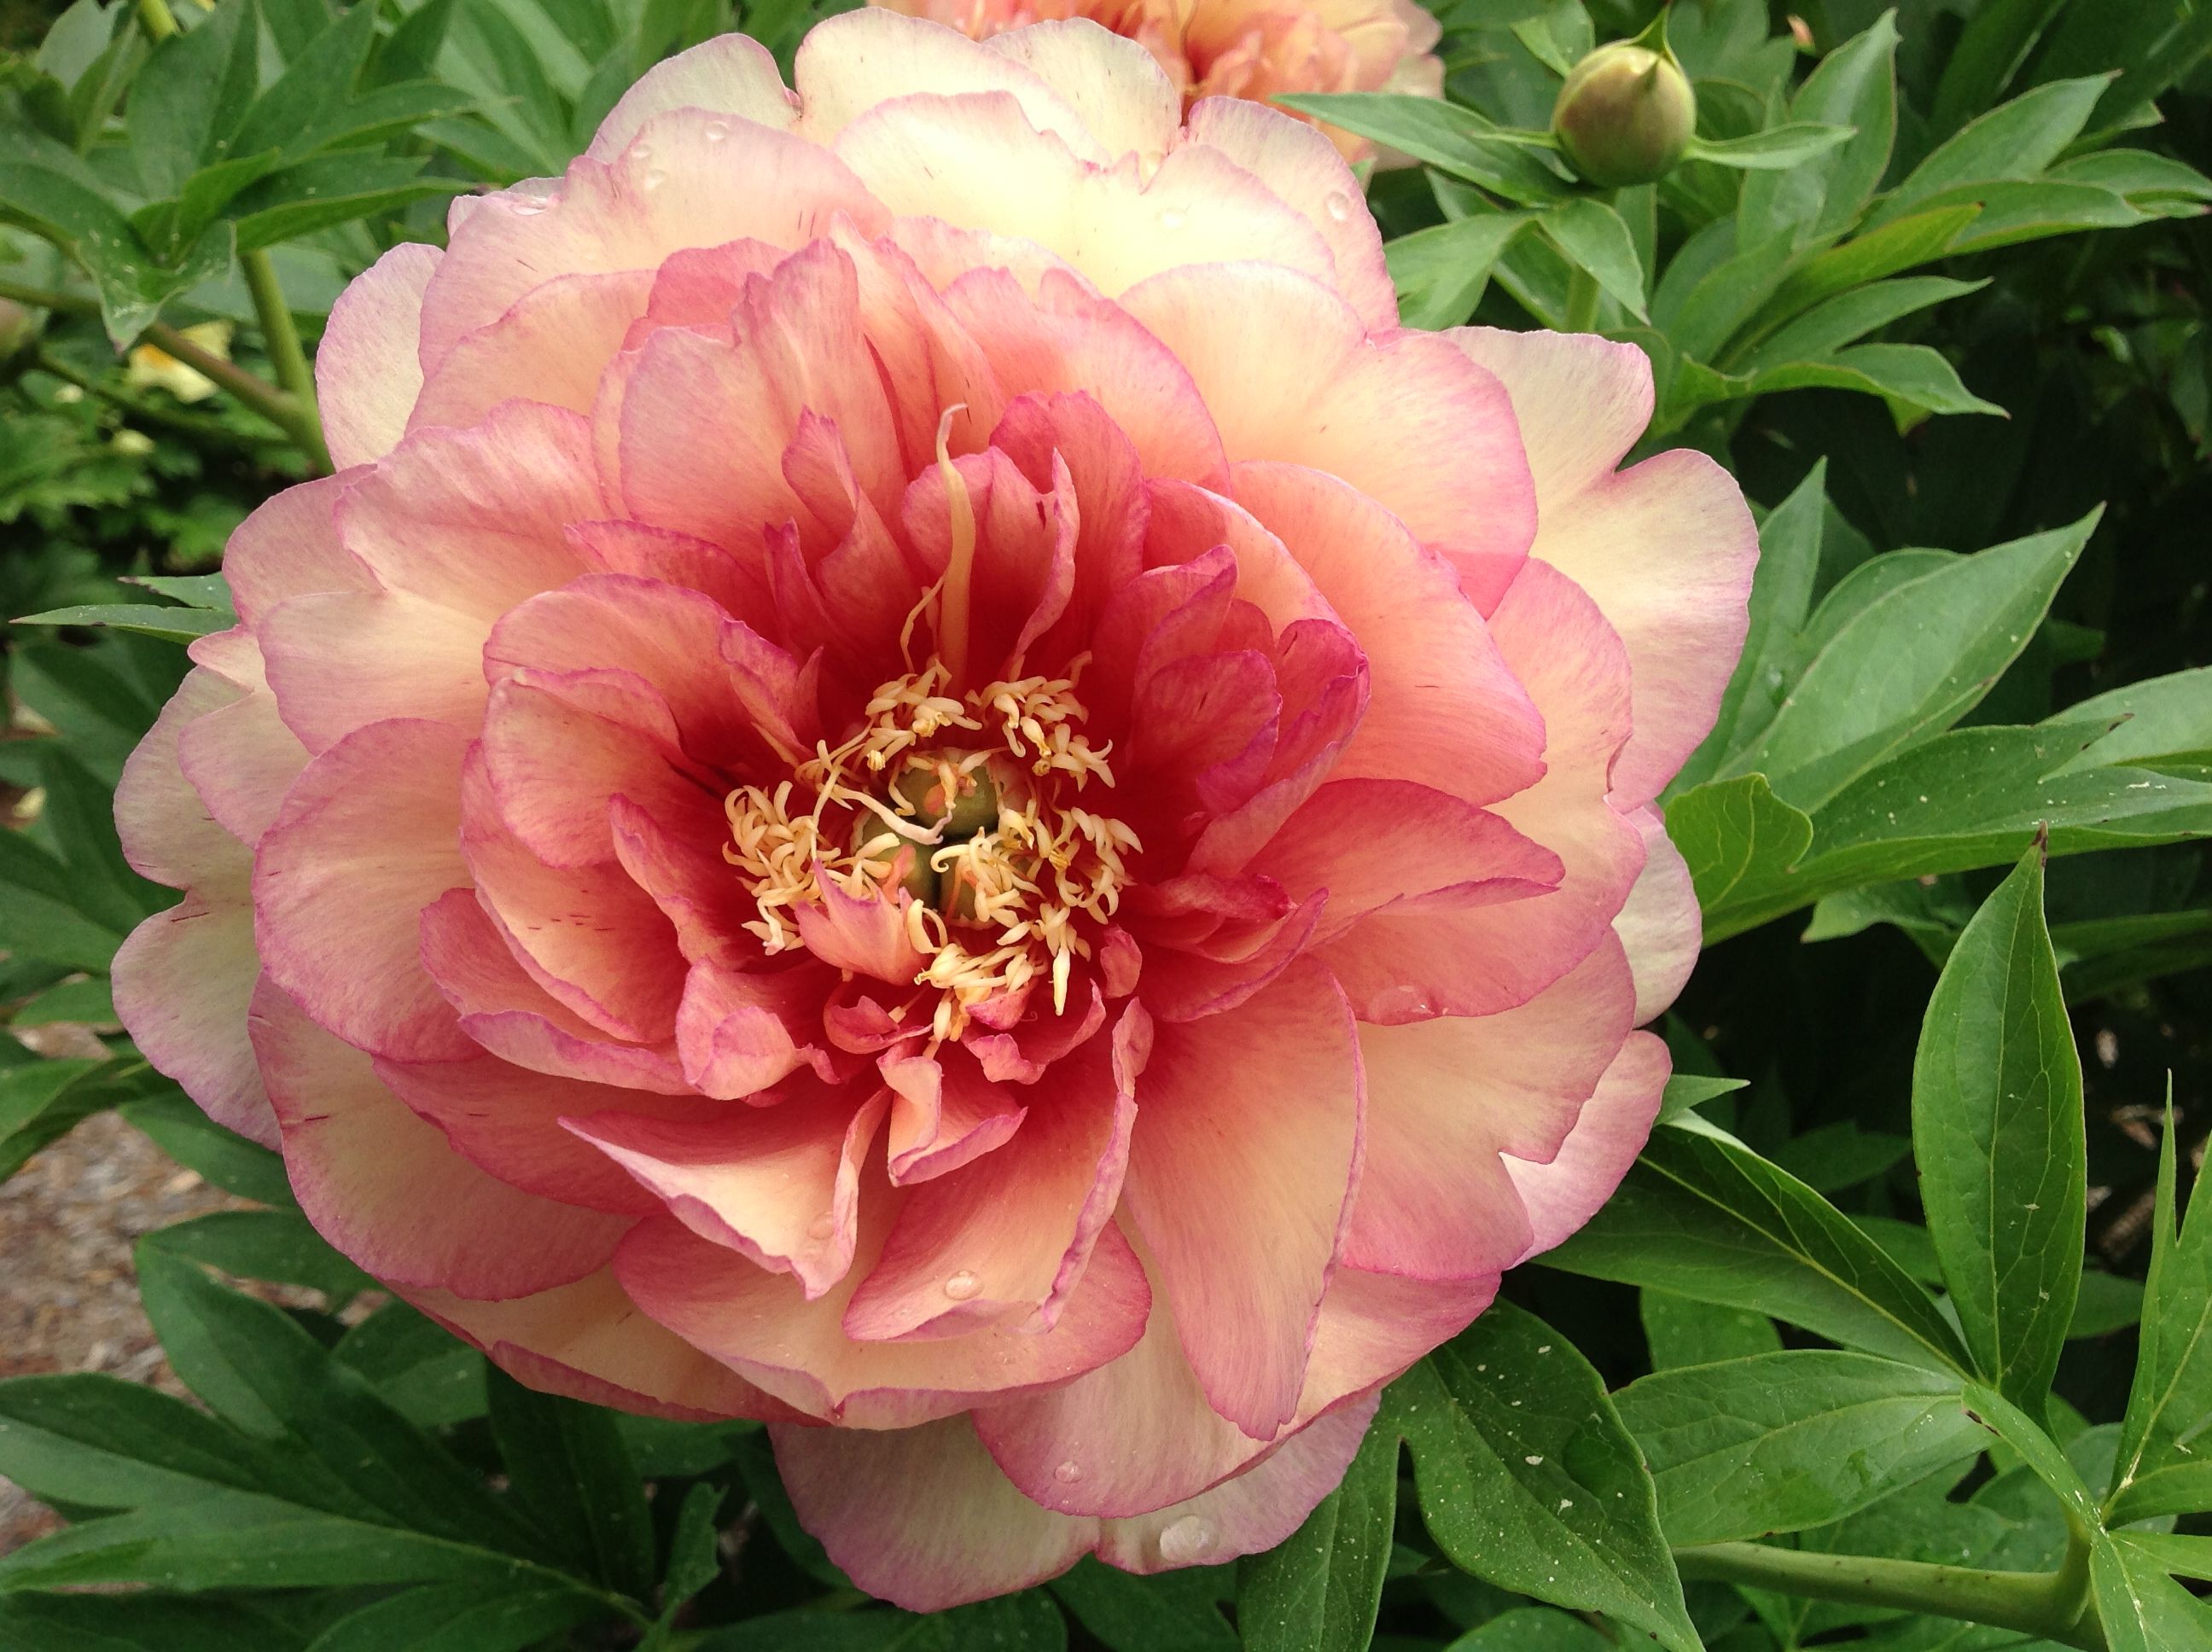 images/plants/paeonia/pae-truly-scrumptious/pae-truly-scrumptious-0001.JPG